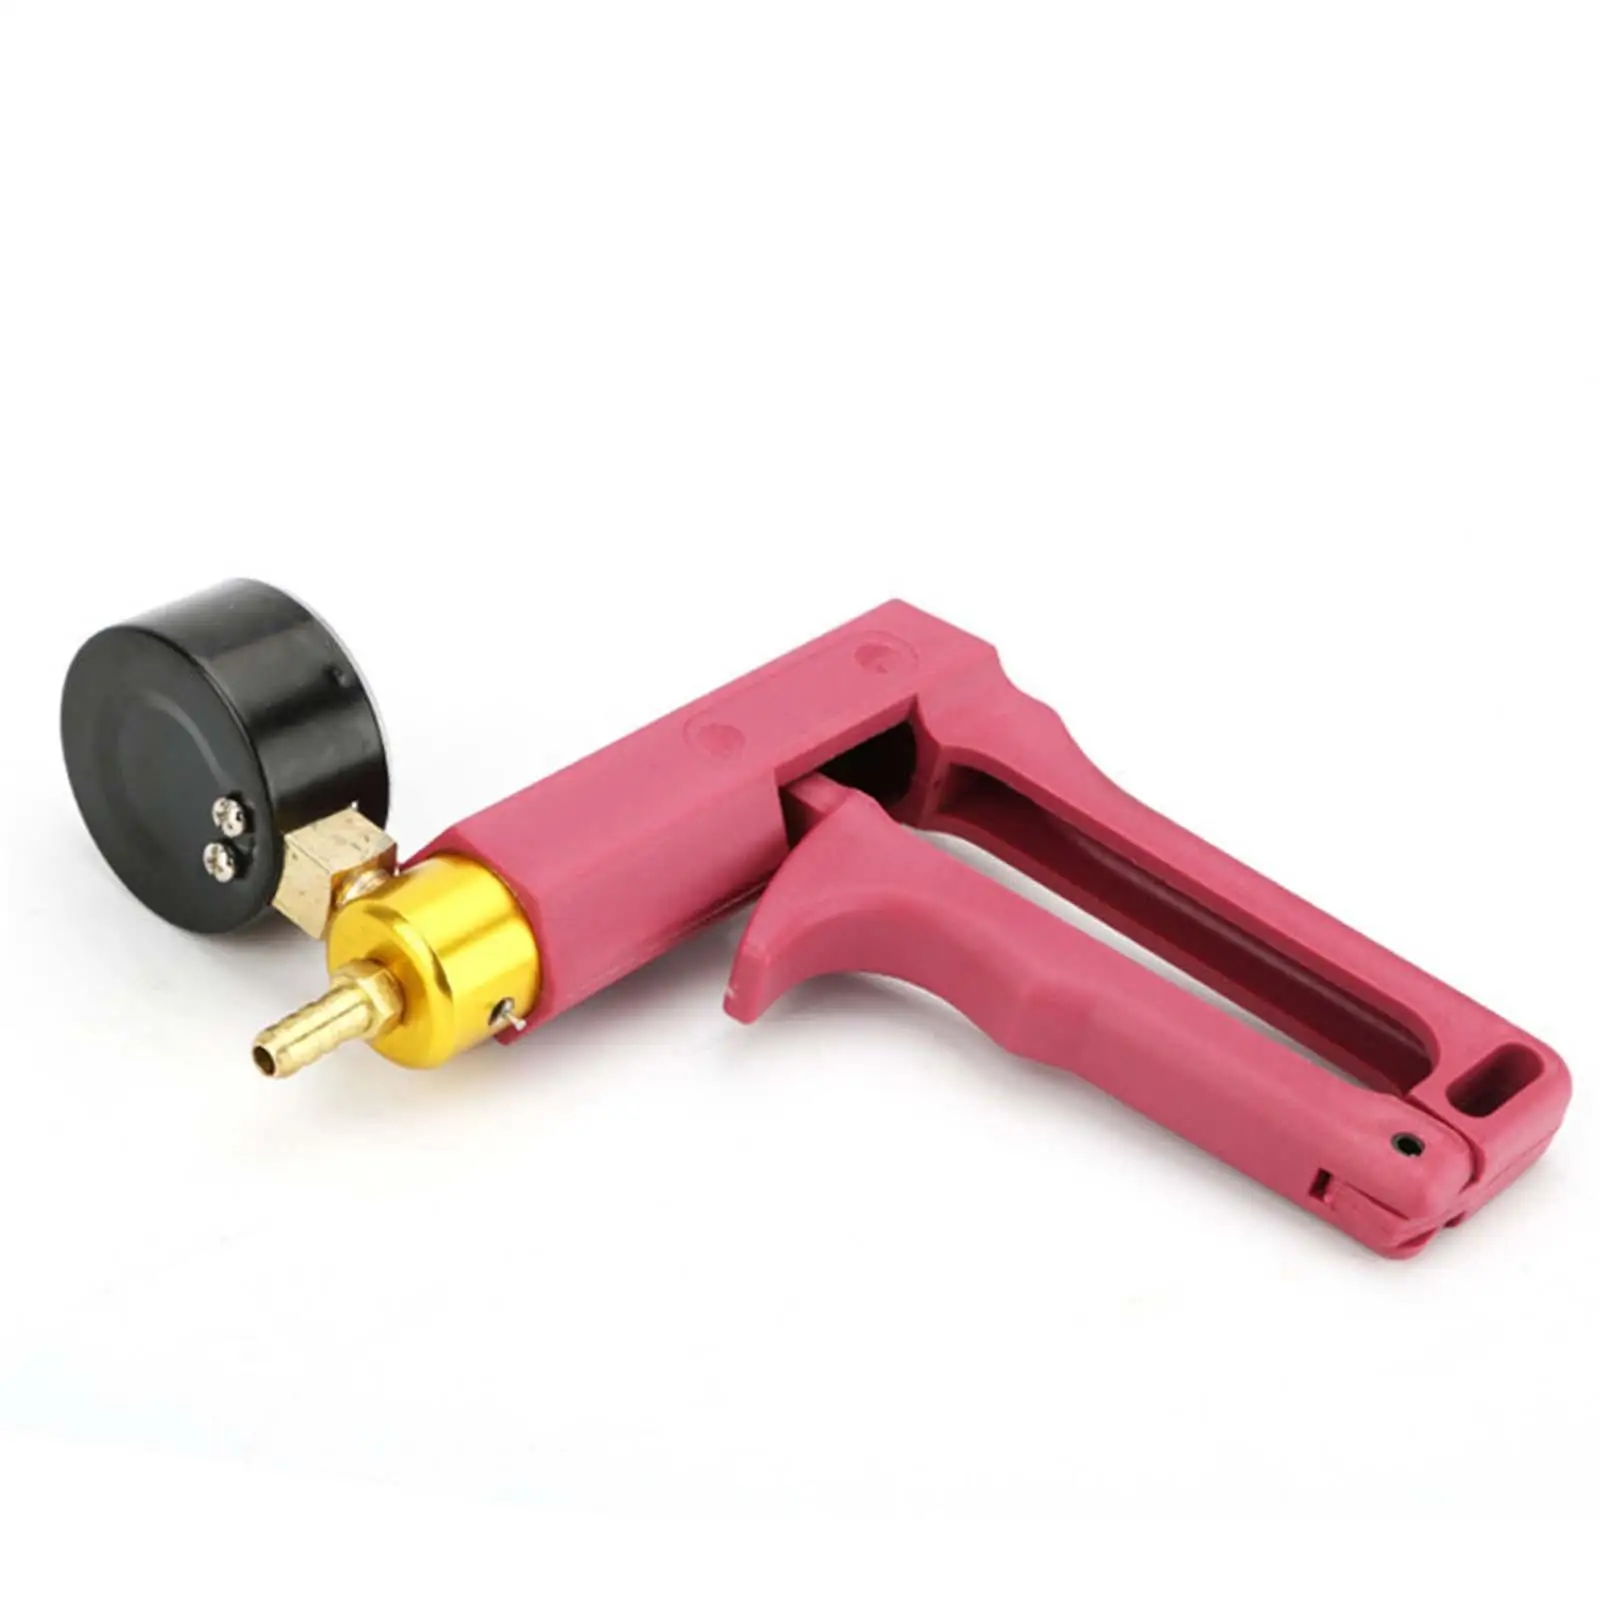 2 in 1 Brake Bleed, with Adapters Accessories with Gauge Multifunctional images - 6